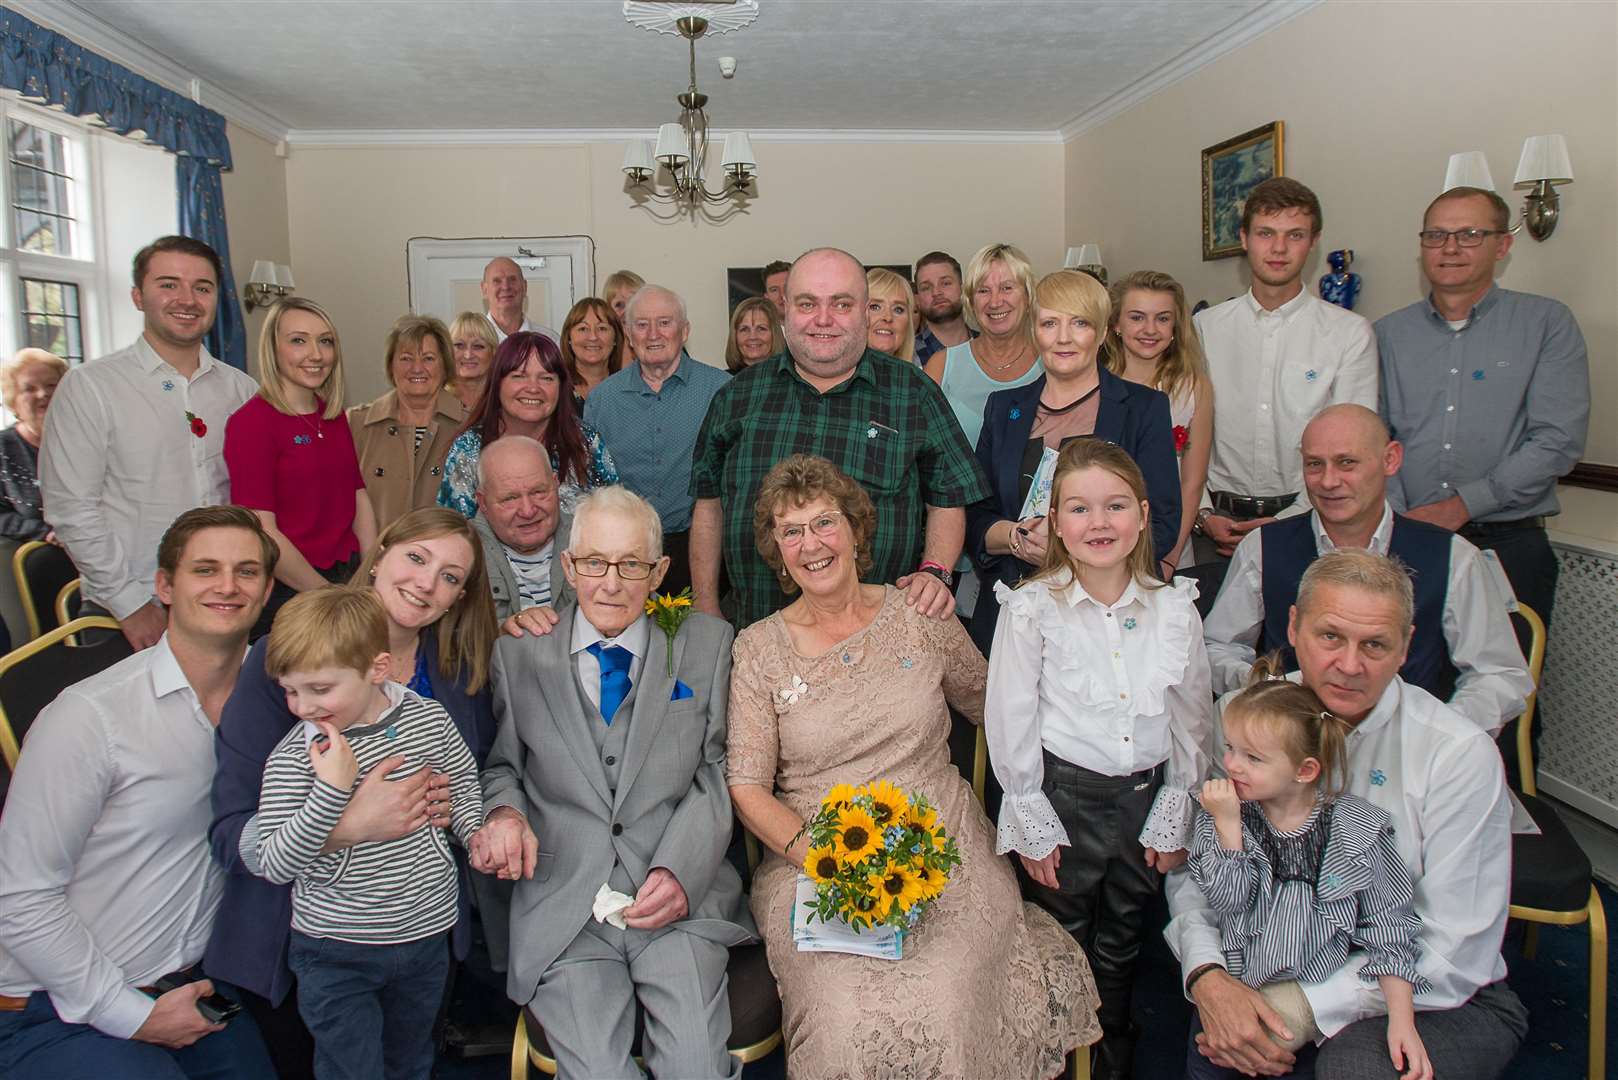 Charlie and Judy with their friends and relatives